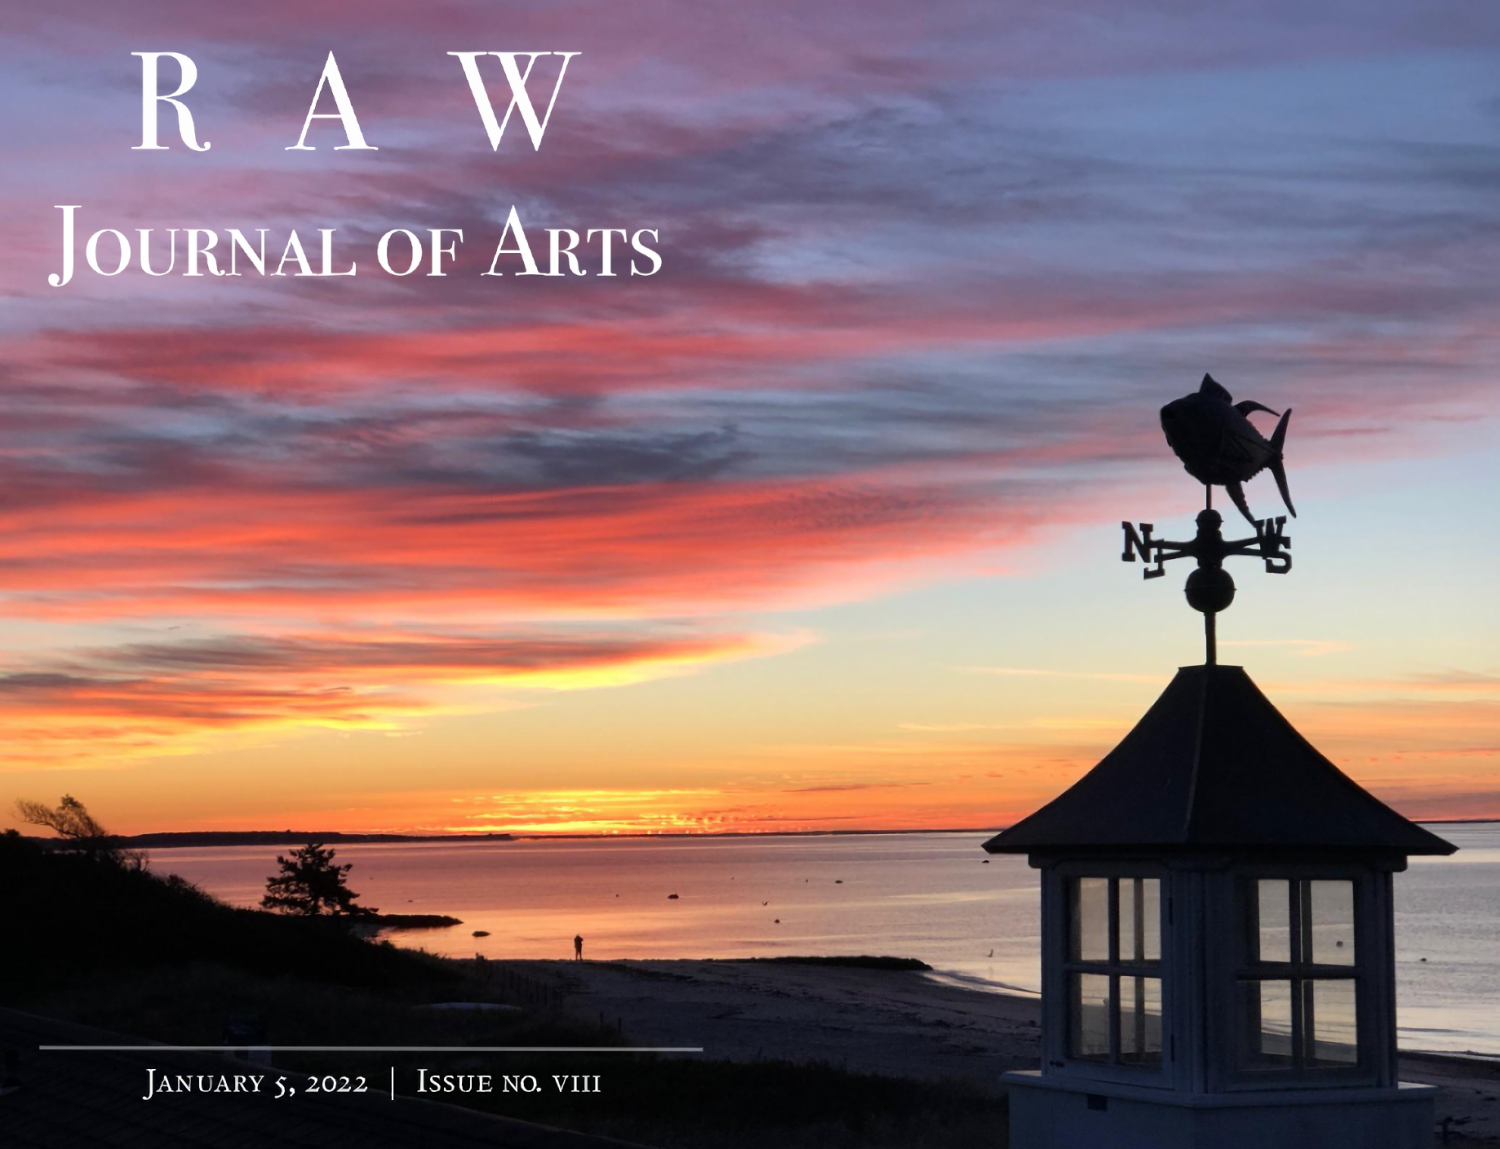 Publication in RAW Journal of Arts Issue VIII, 2022